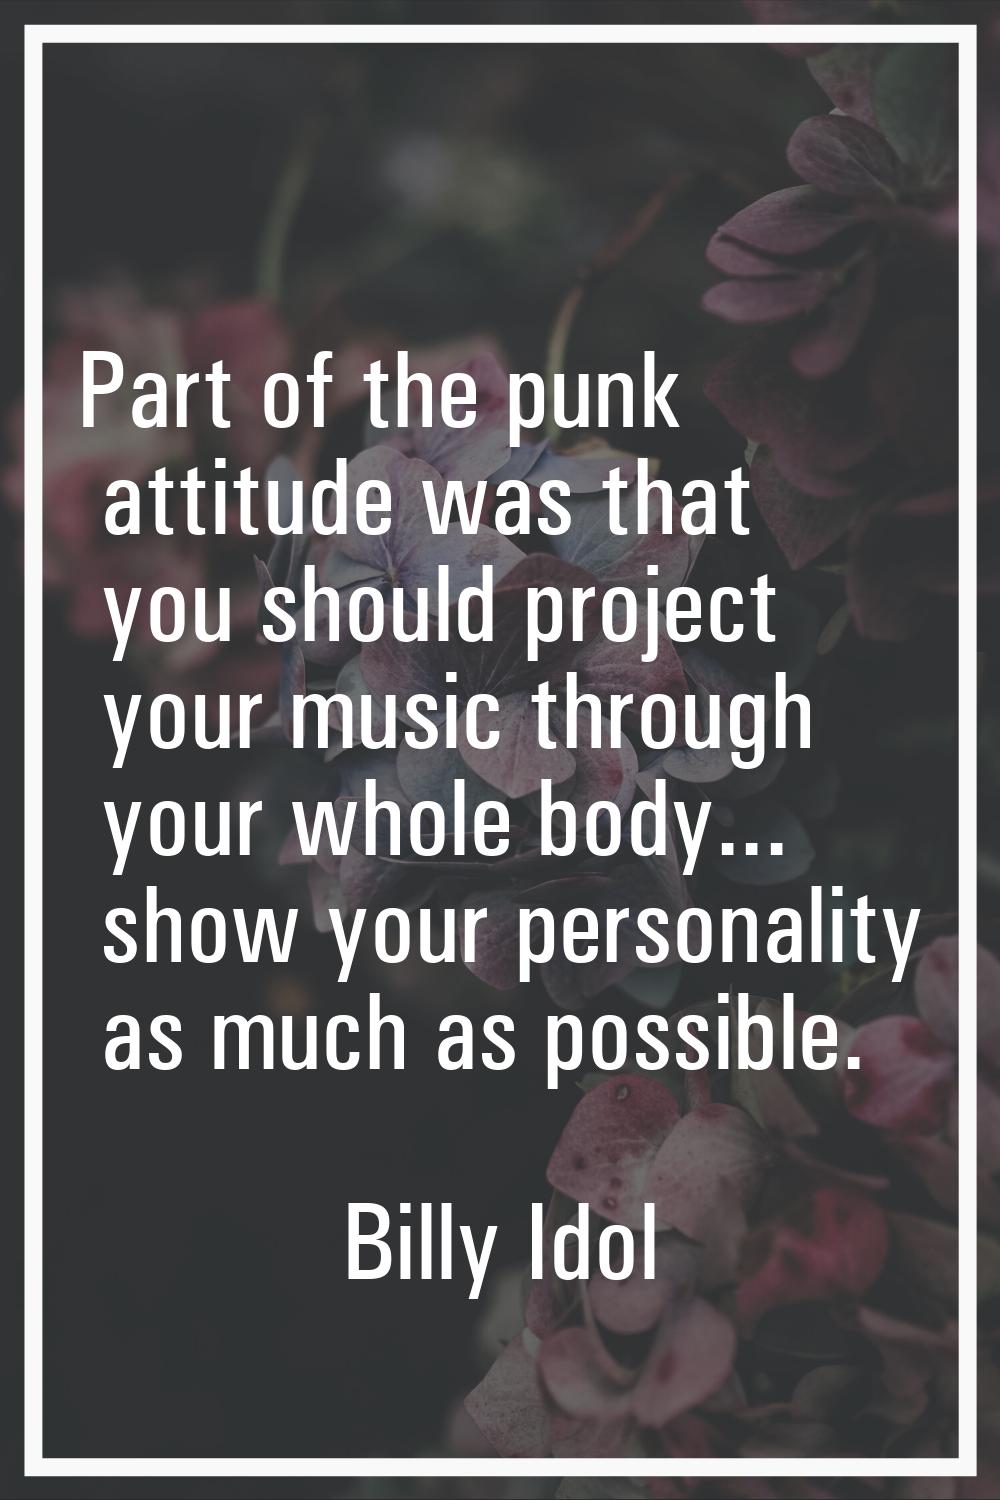 Part of the punk attitude was that you should project your music through your whole body... show yo